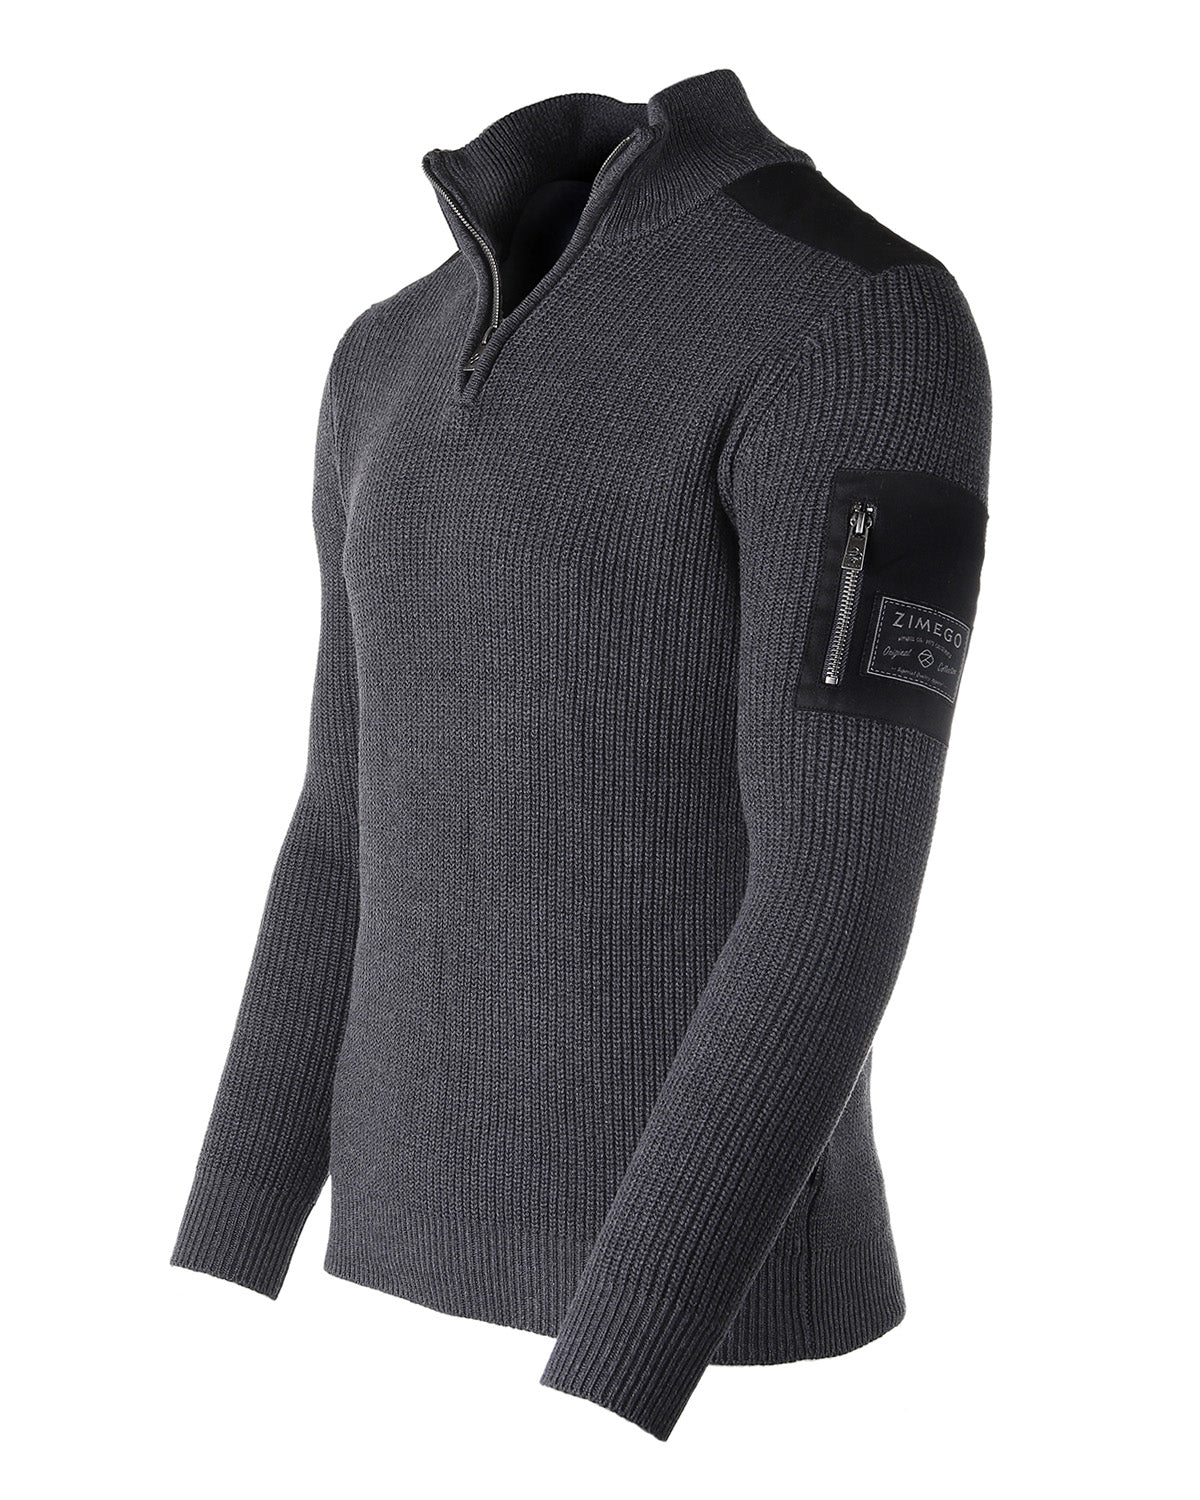 Men's Long Sleeve Pullover Quarter Zip Mock Neck Polo Sweater with Pocket Charcoal